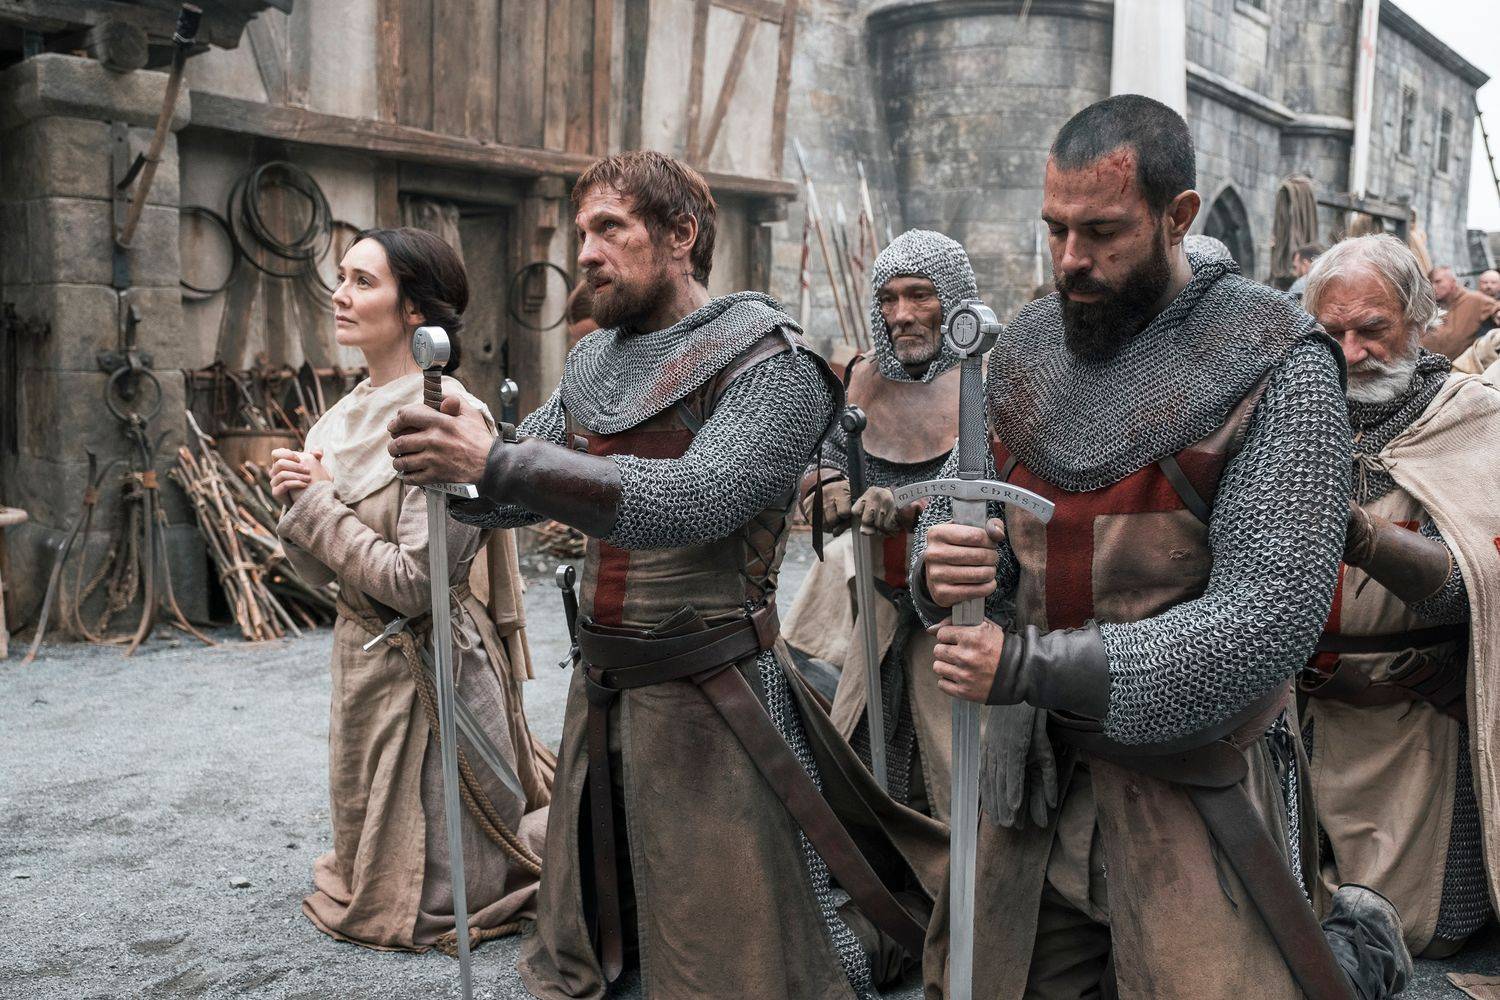 shows like game of thrones on netflix,shows like game of thrones reddit,shows like game of thrones on hotstar,web series like game of thrones in hindi,15 shows like game of thrones,shows like game of thrones on amazon prime,shows like game of thrones 2021,tv shows like game of thrones and walking dead,new series like game of thrones,shows like game of thrones on hbo max,shows like game of thrones and vikings,shows like game of thrones on hulu,shows like game of thrones 2020,shows like game of thrones and the witcher,tv shows like game of thrones,best tv shows like game of thrones,tv shows like game of thrones on netflix,similar shows like game of thrones,fantasy shows like game of thrones,tv shows like game of thrones reddit,hbo shows like game of thrones,upcoming shows like game of thrones,movies and shows like game of thrones,shows to watch if you like game of thrones,shows if you like game of thrones,shows and movies like game of thrones,shows just like game of thrones,shows to watch if you like game of thrones reddit